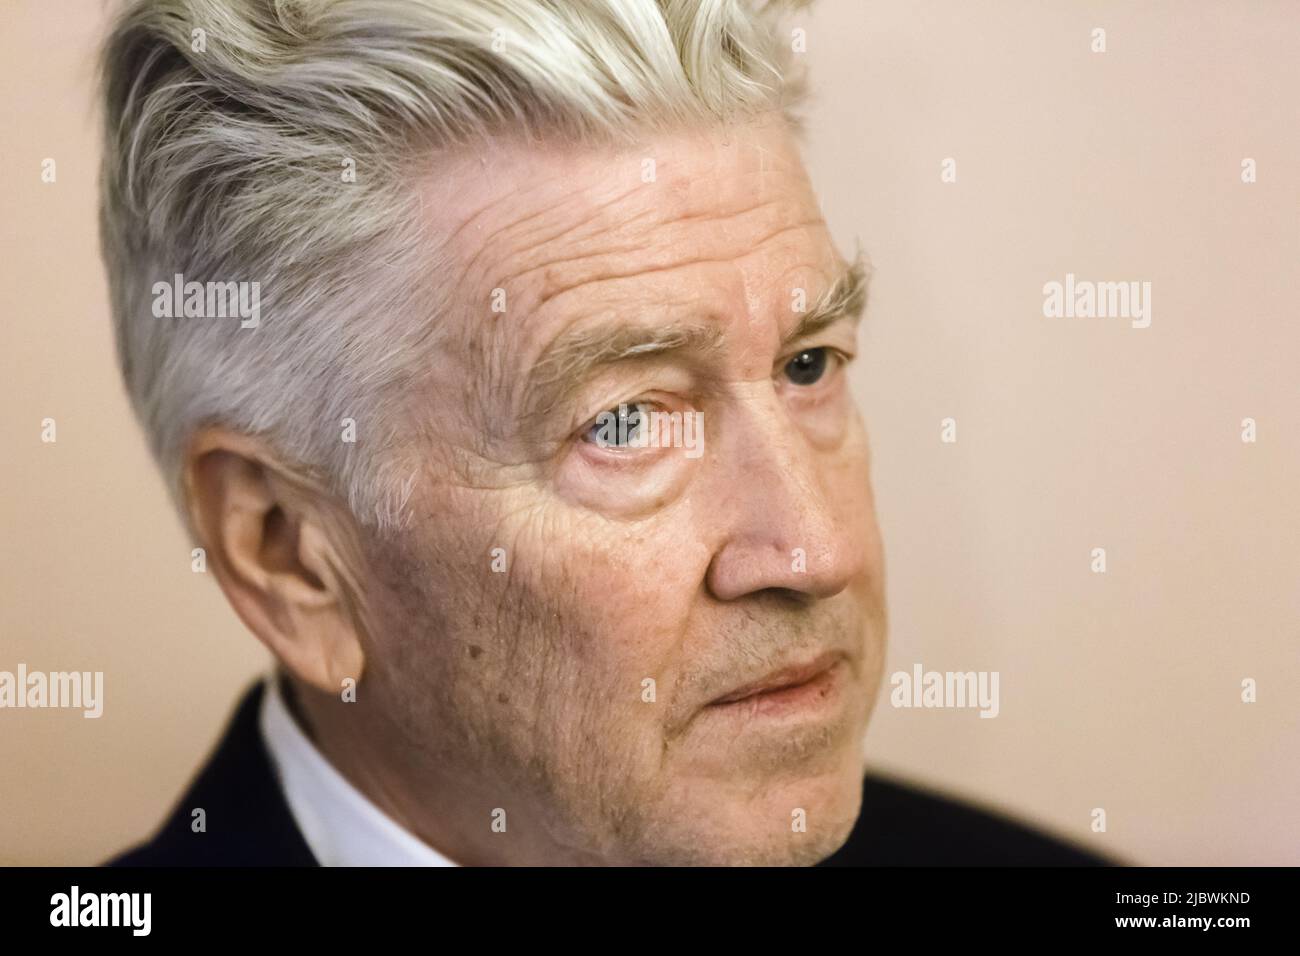 American film director, screenwriter, producer and actor David Lynch arrived in Ukraine to open an office of his charitable foundation. The film director David Keith Lynch (born January 20, 1946) is an American filmmaker, painter, visual artist, actor, musician, and writer. Stock Photo